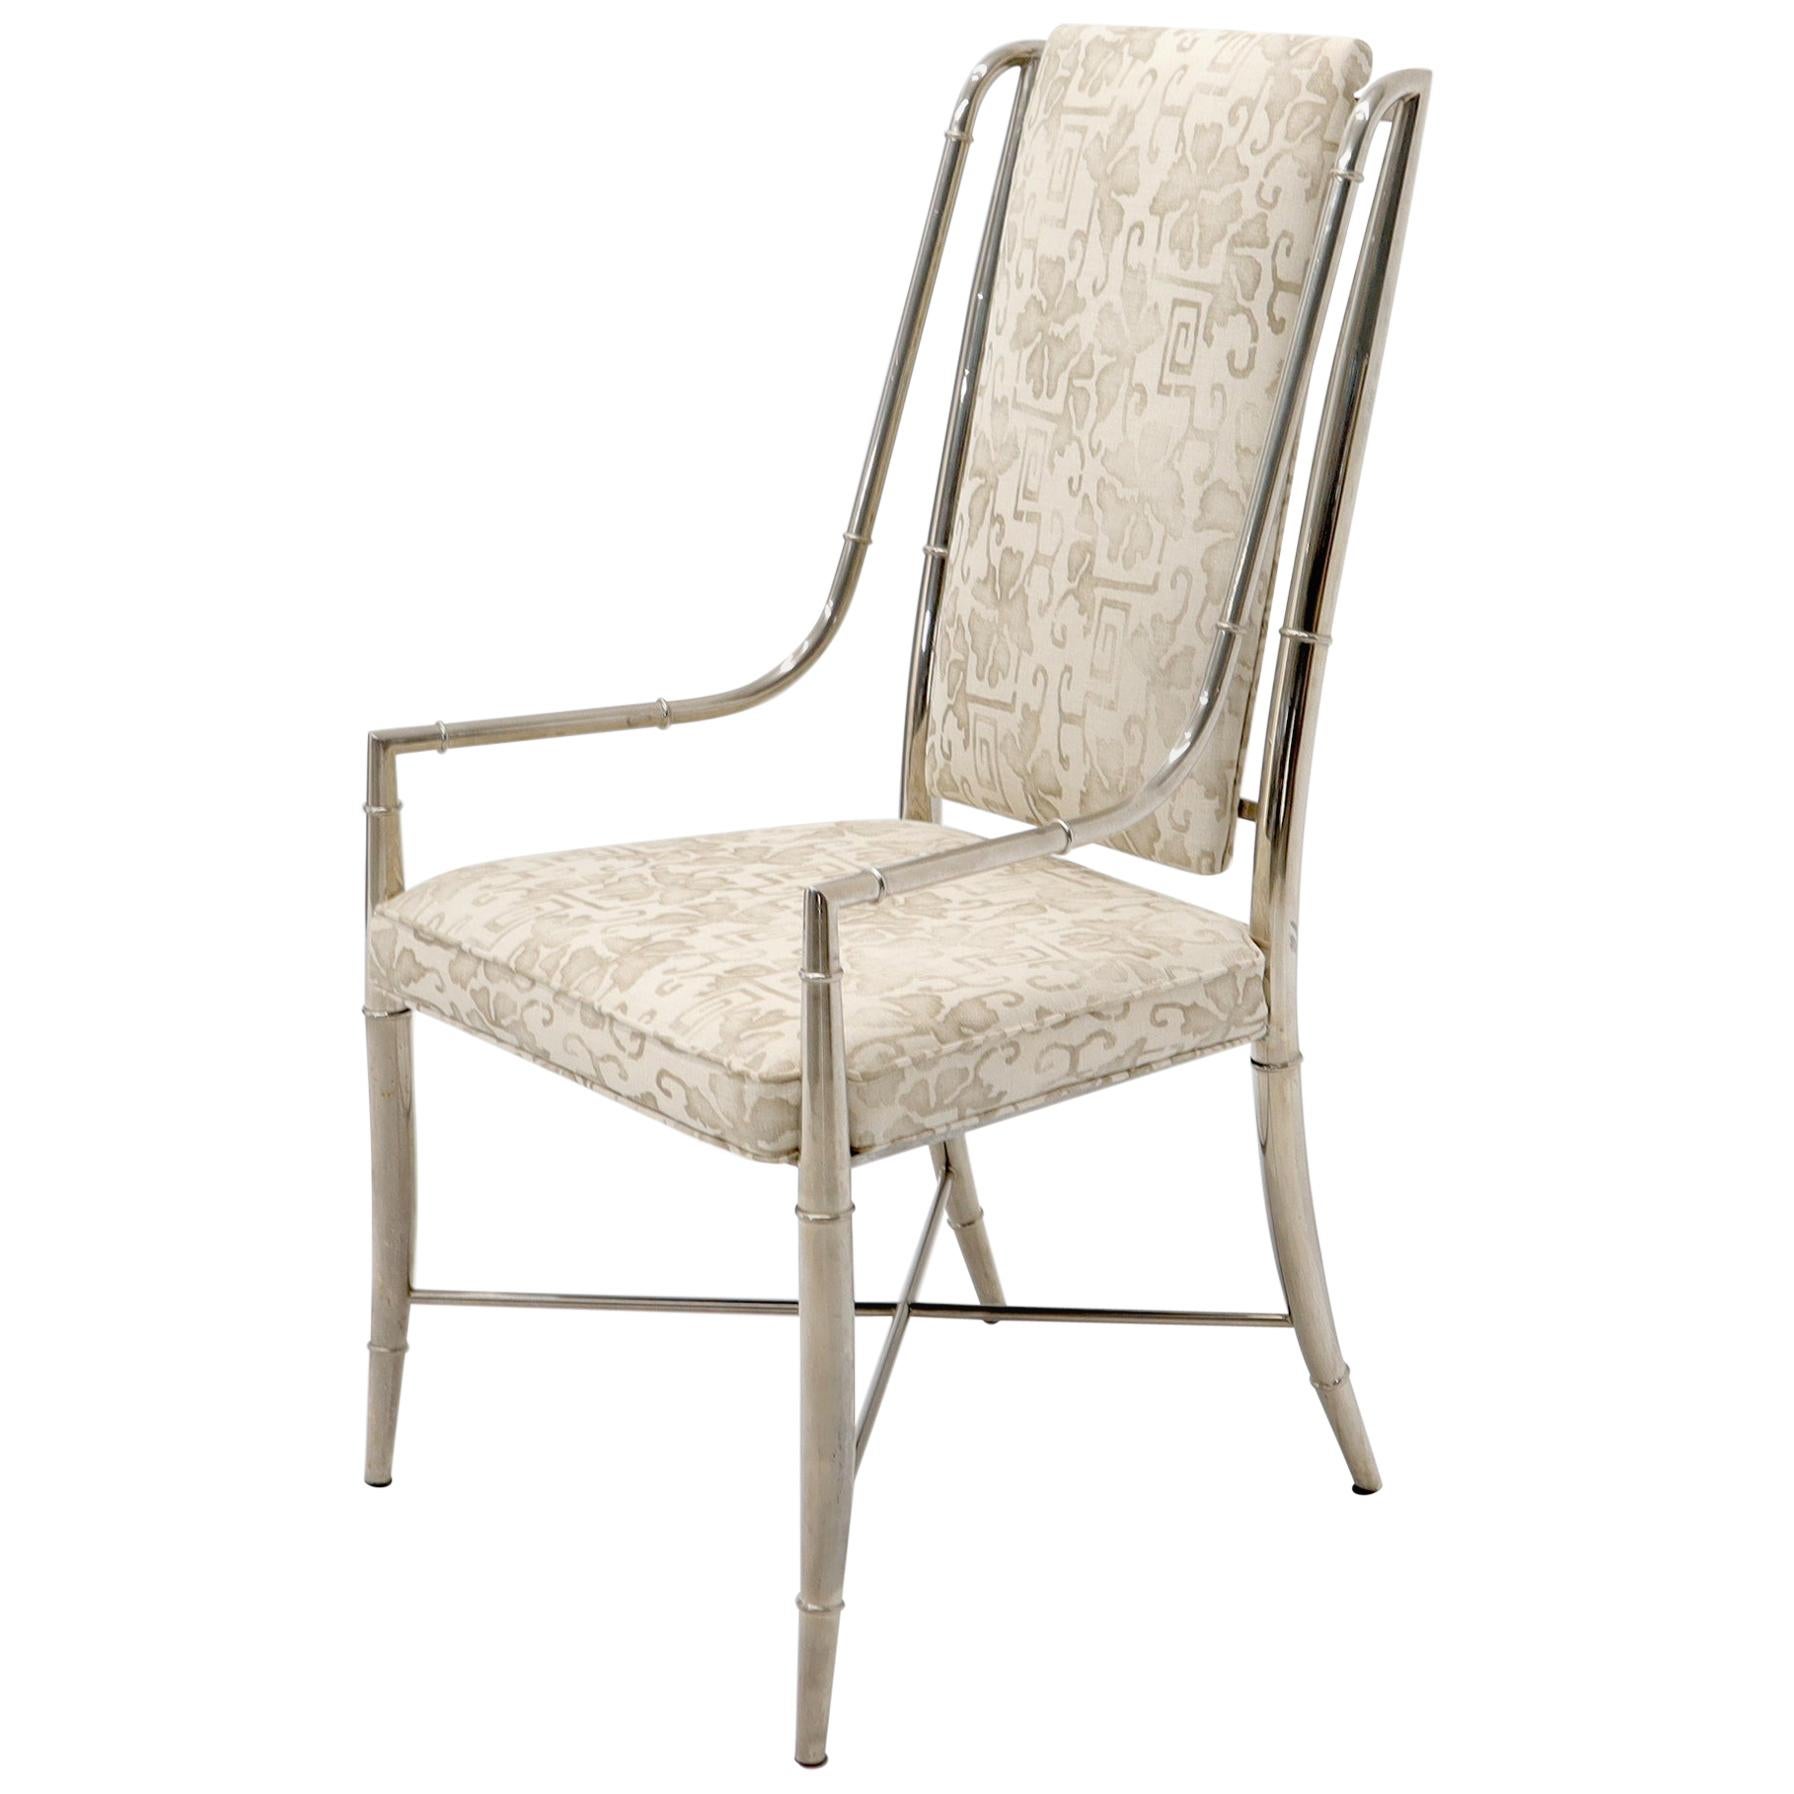 Imperial Dining Room Chair by Weiman / Warren Lloyd for Mastercraft in Chrome